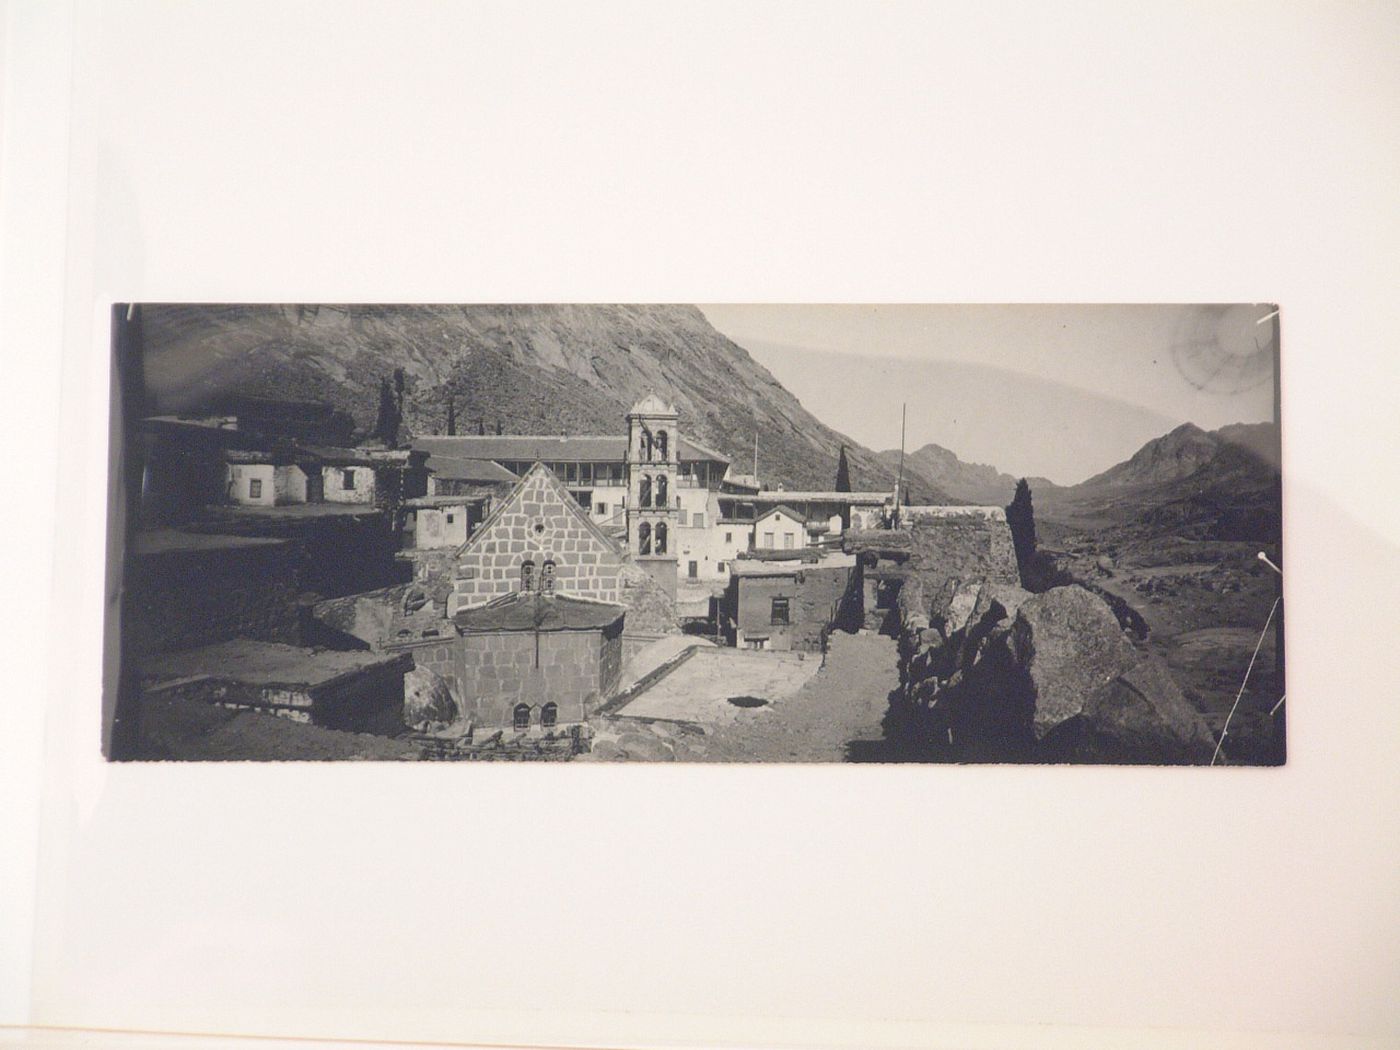 View of an unidentified village with mountains in the background